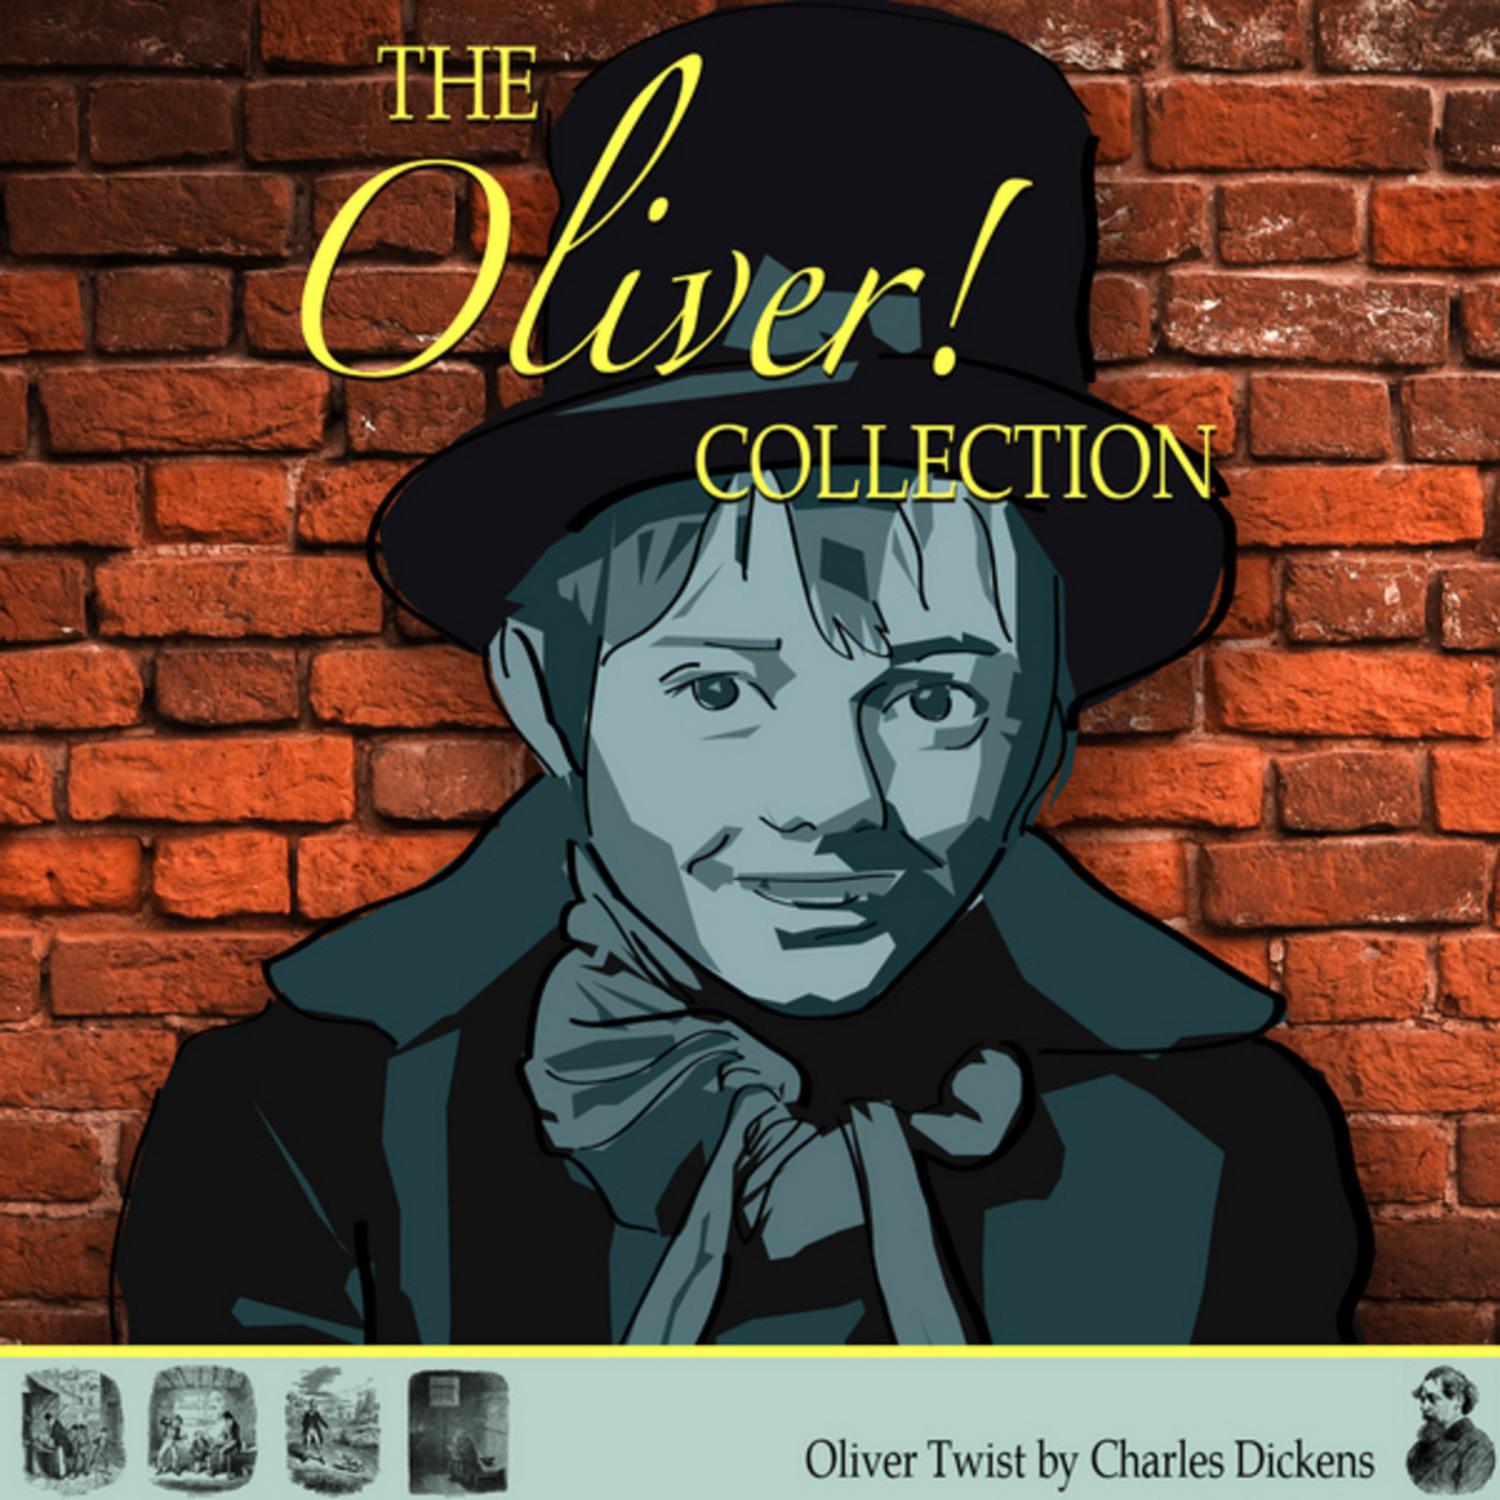 The Oliver! Collection